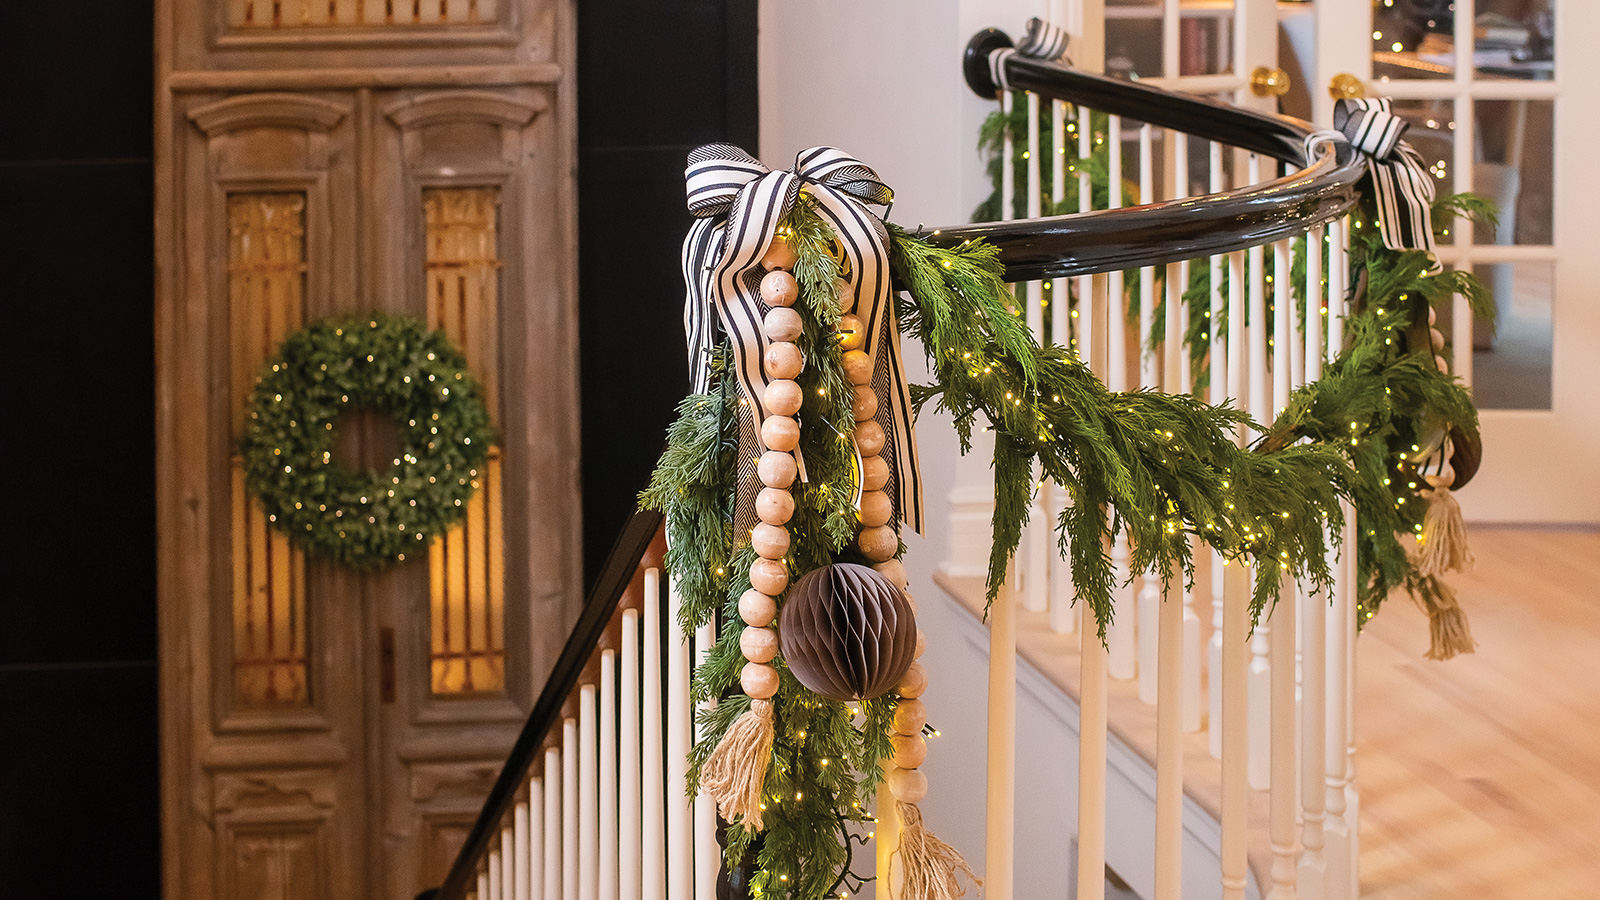 Banister decorated with holiday greenery and Christmas lights